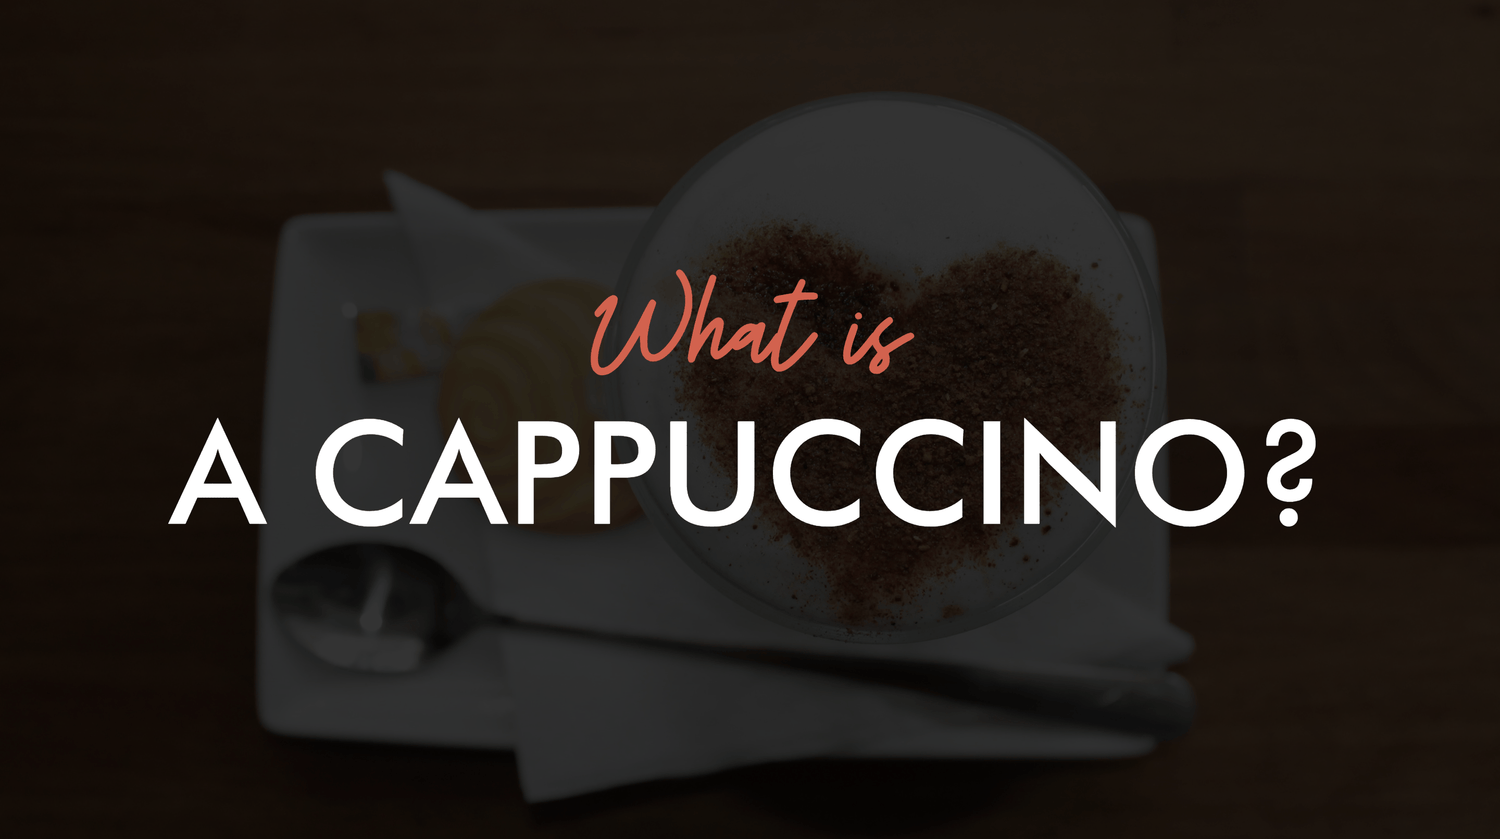 What Is A Cappuccino?